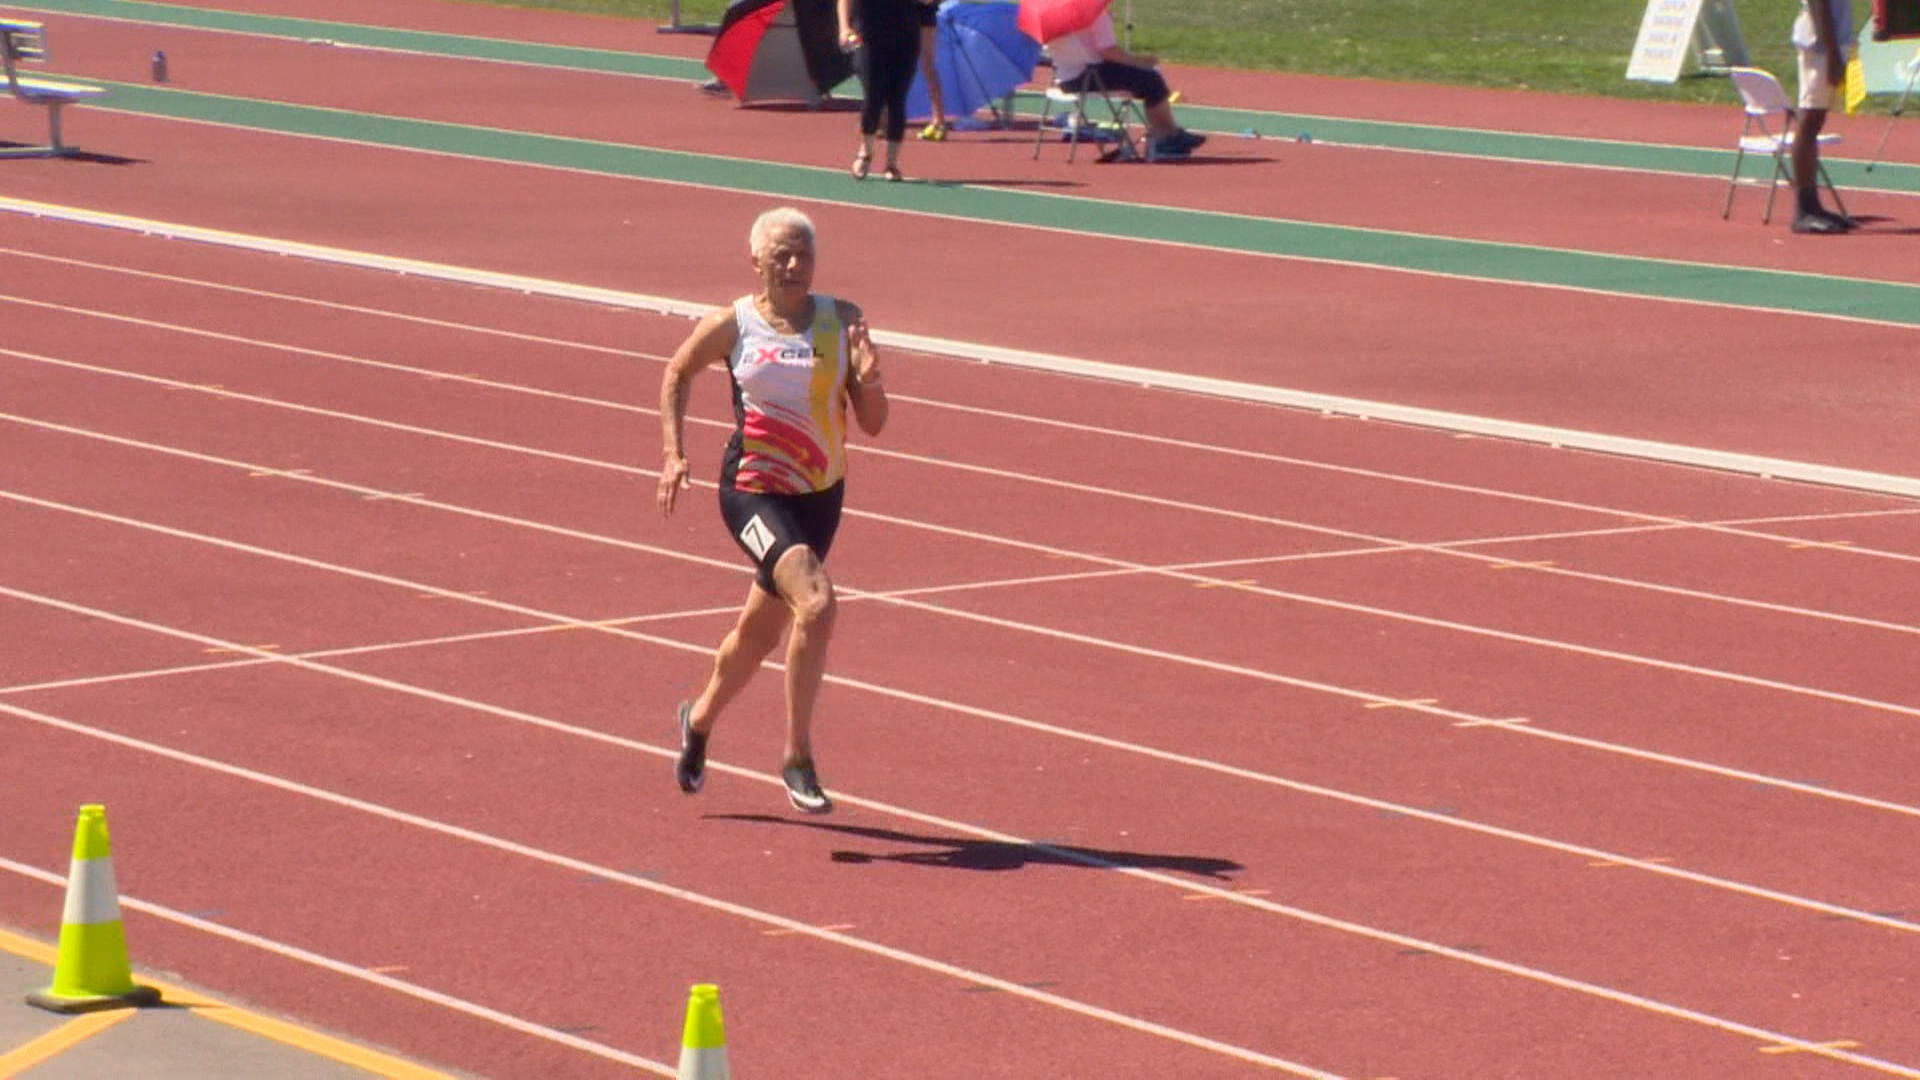 Sask. 80-year-old breaks her 13th track and field world record